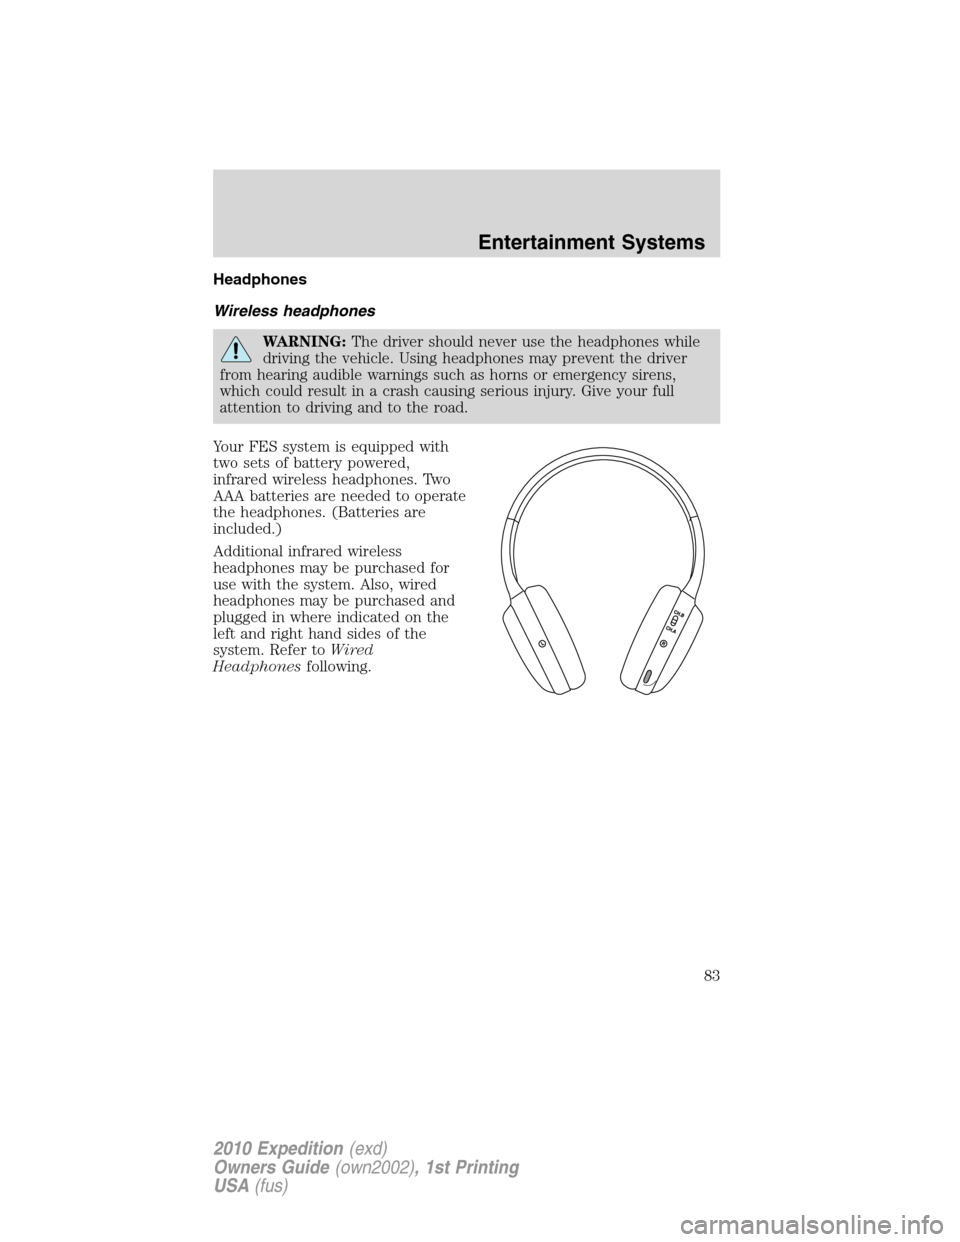 FORD EXPEDITION 2010 3.G Owners Manual Headphones
Wireless headphones
WARNING:The driver should never use the headphones while
driving the vehicle. Using headphones may prevent the driver
from hearing audible warnings such as horns or emer